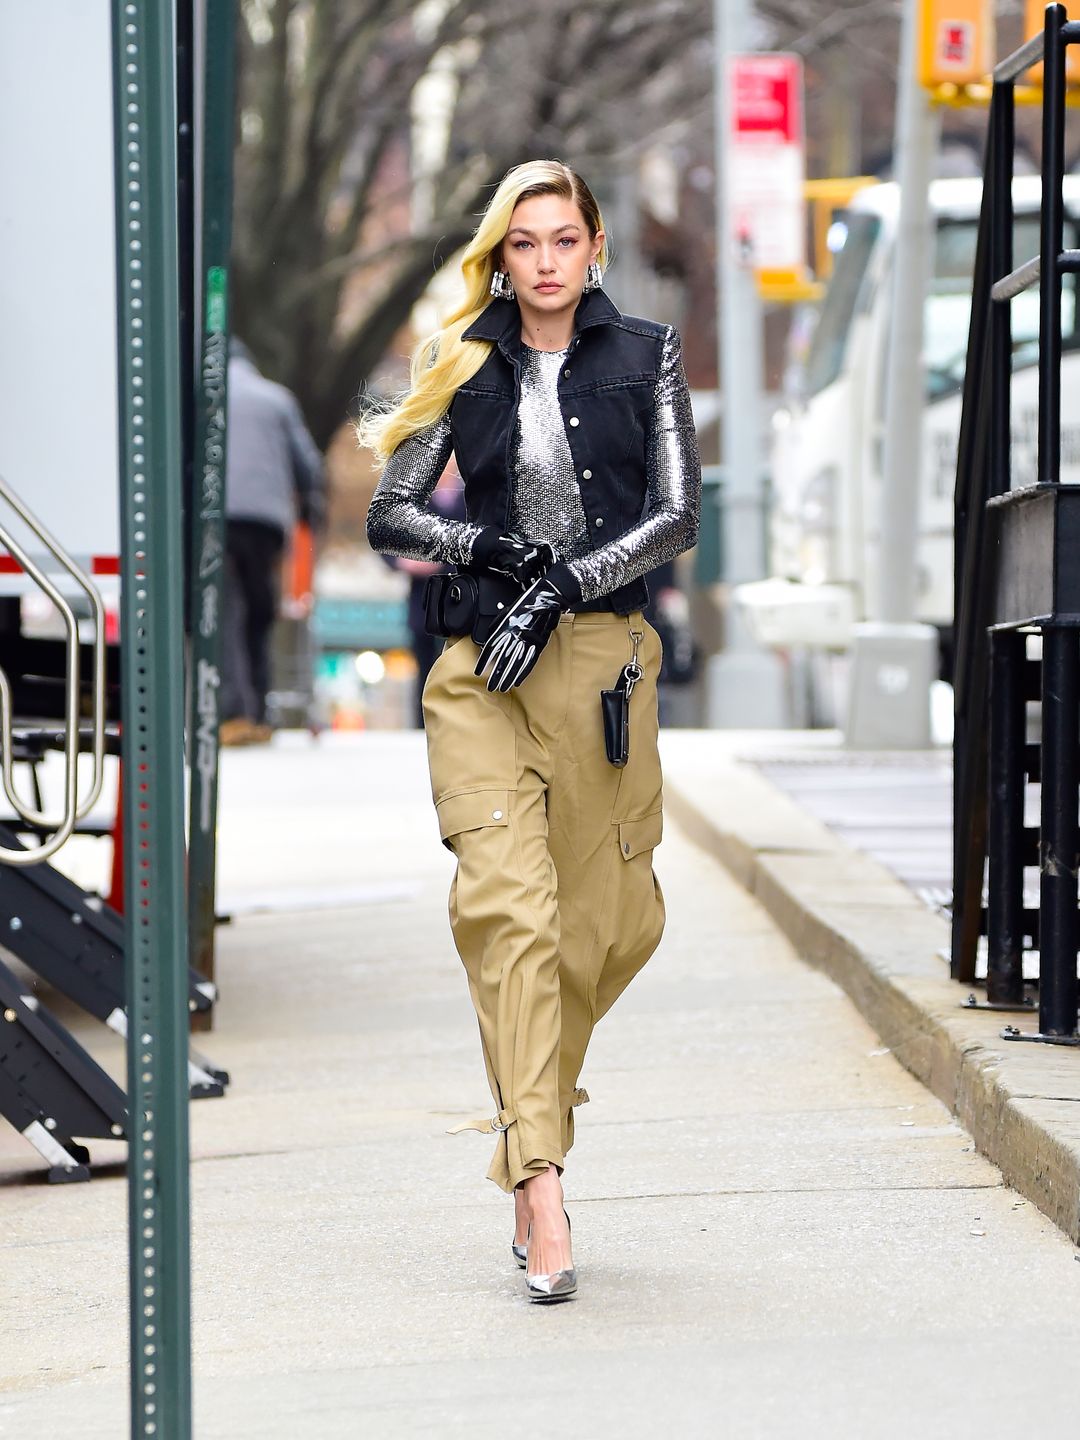 On set for a Maybelline commercial, Gigi Hadid wears a dazzling top with cargo pants 